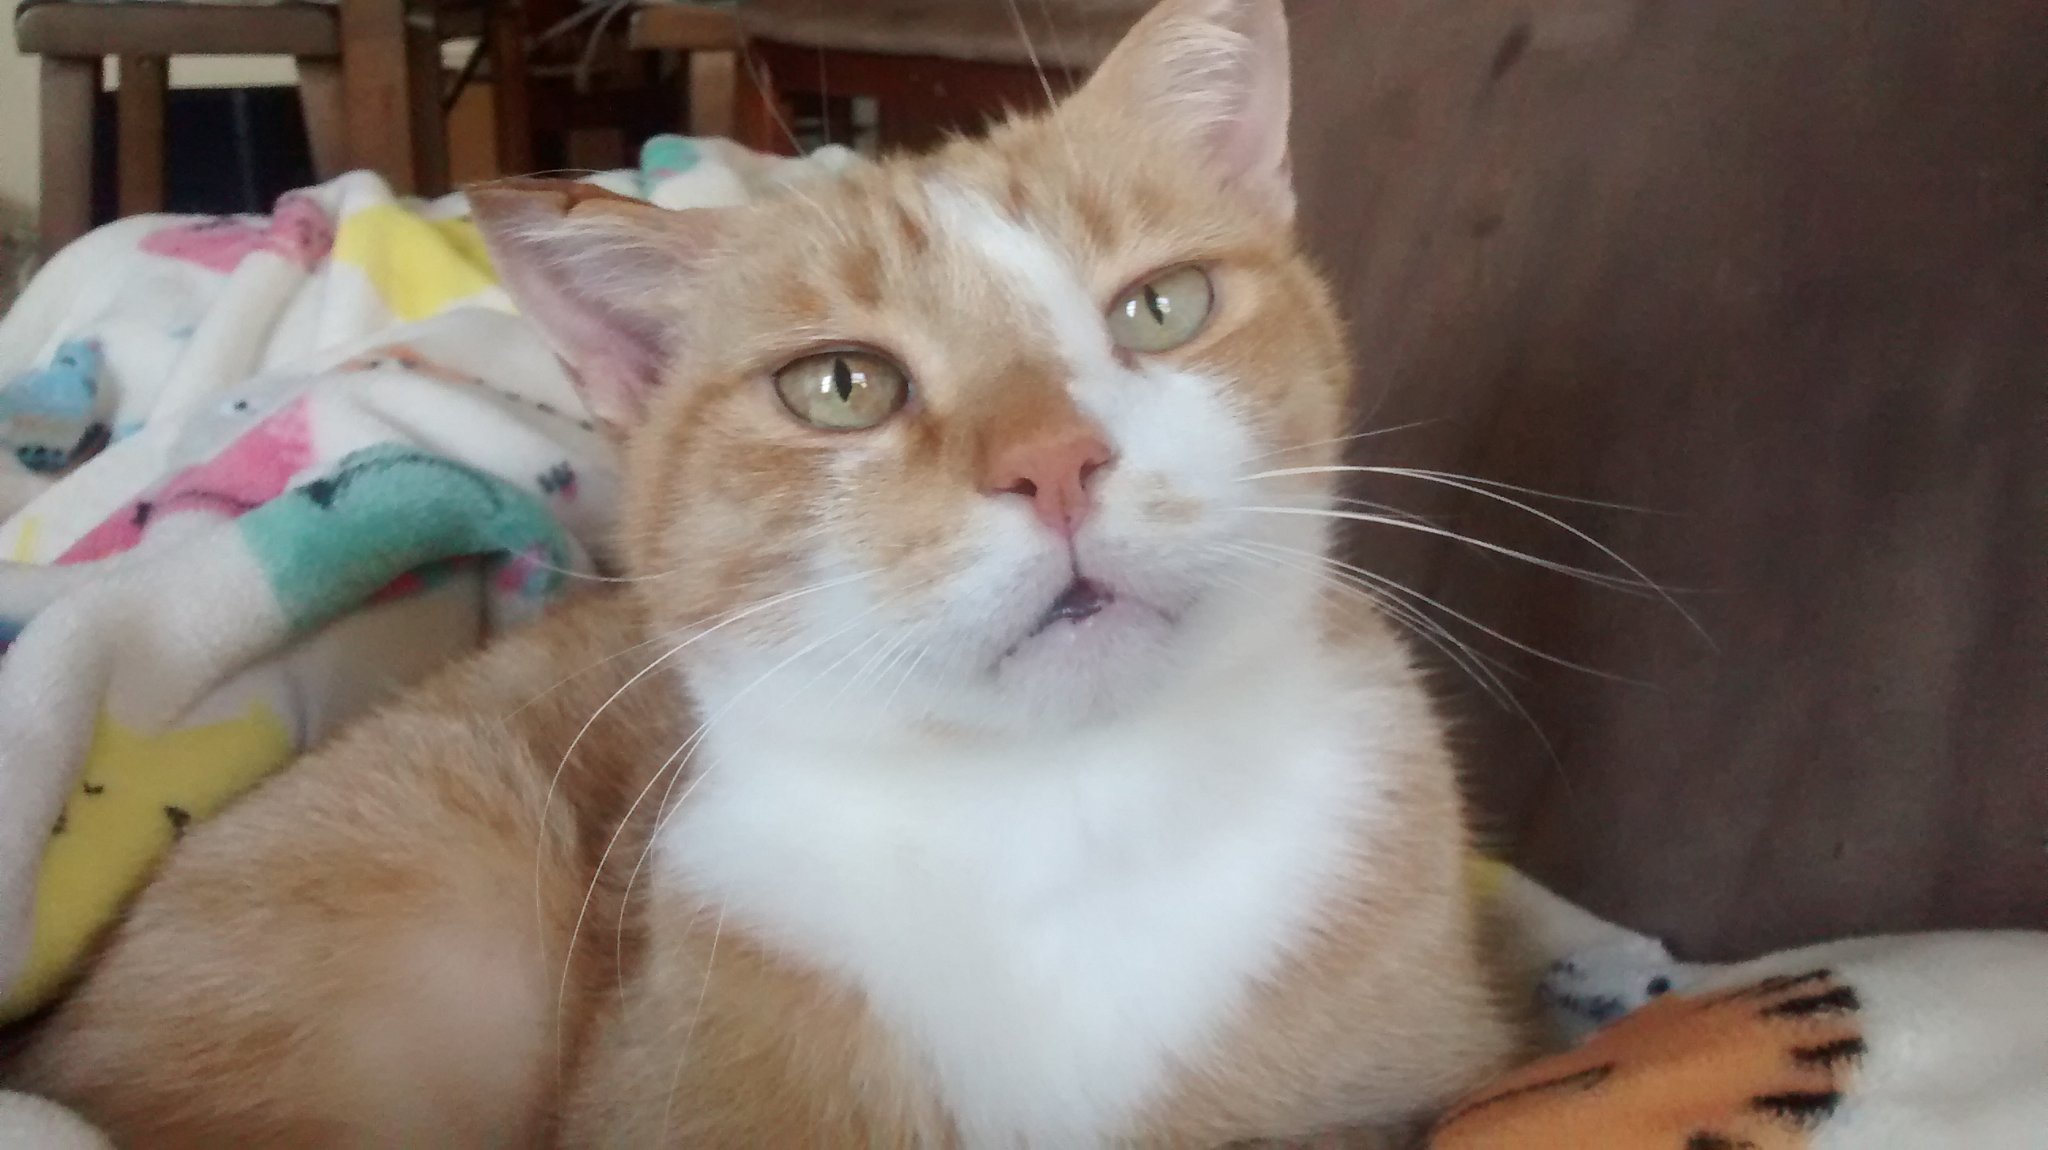 #NYC #gingercat rescue #adopted  @barcanimals.Eartipped total lap cat. ❤ friends & followers! #catsoftwitter  #adoptdontshop #rescuesrock #superseniorcatsclub